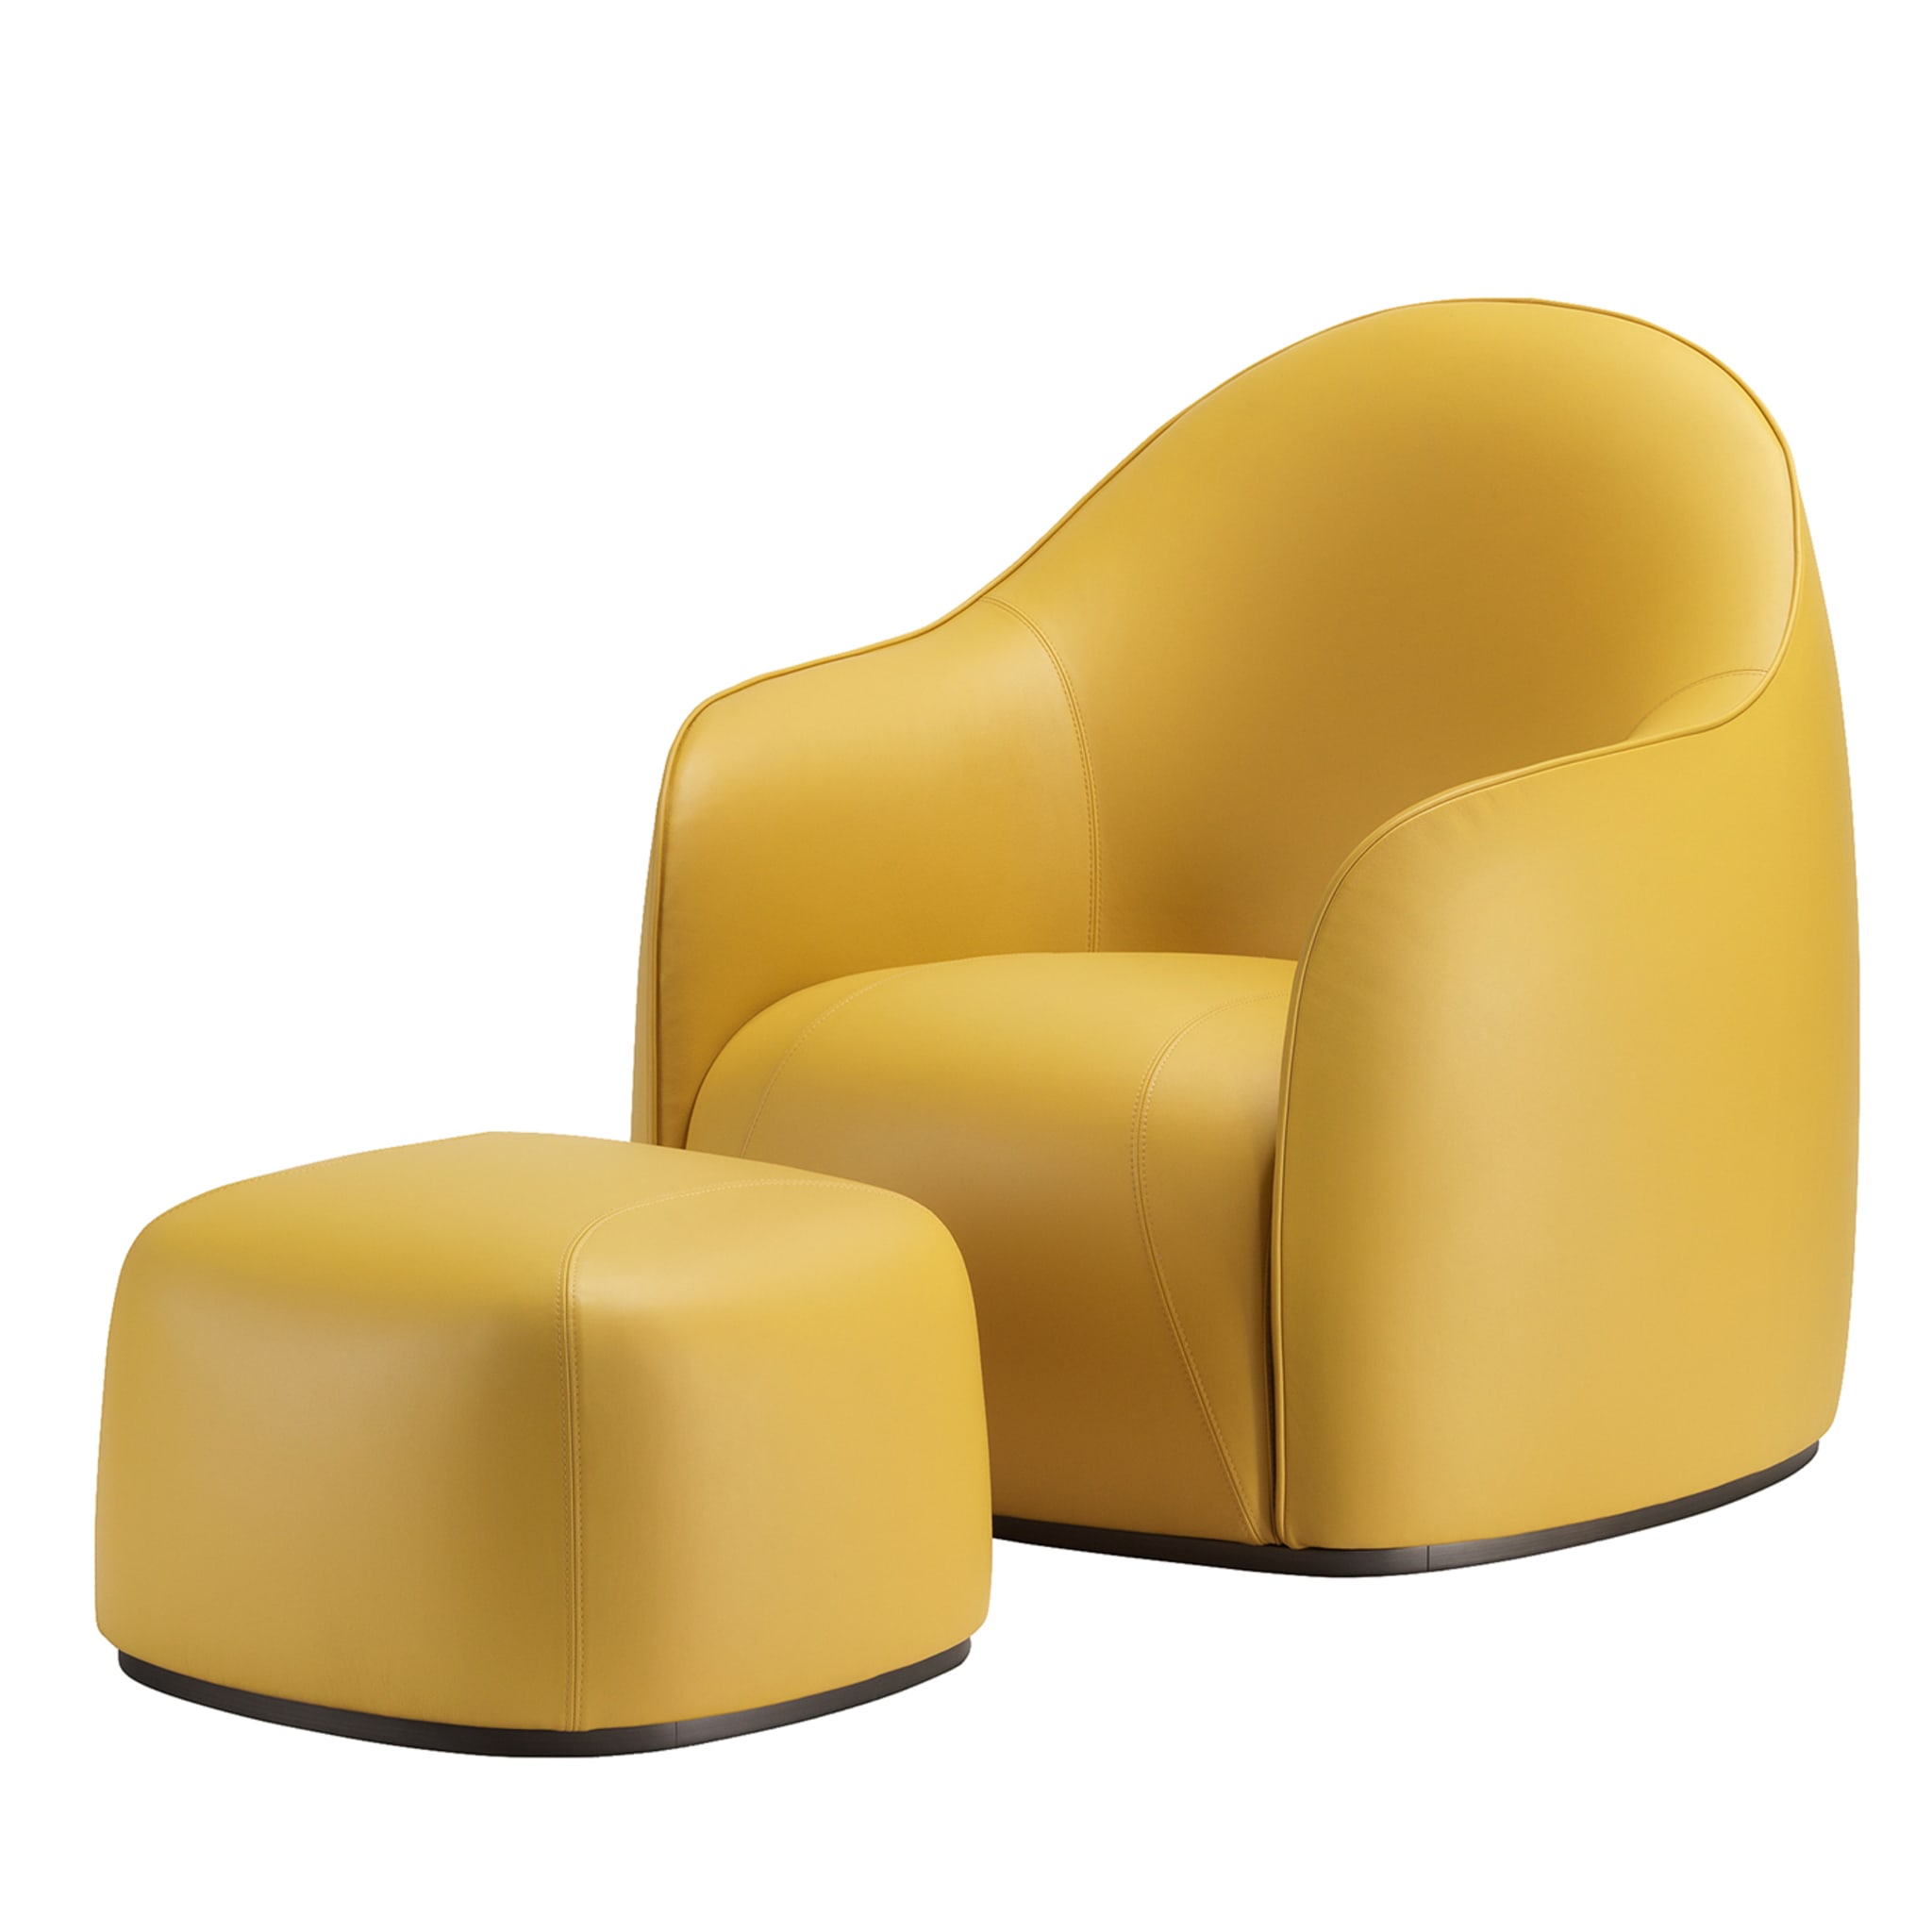 Sweet Set of Mustard Armchair and Pouf by Elisa Giovannoni - Main view